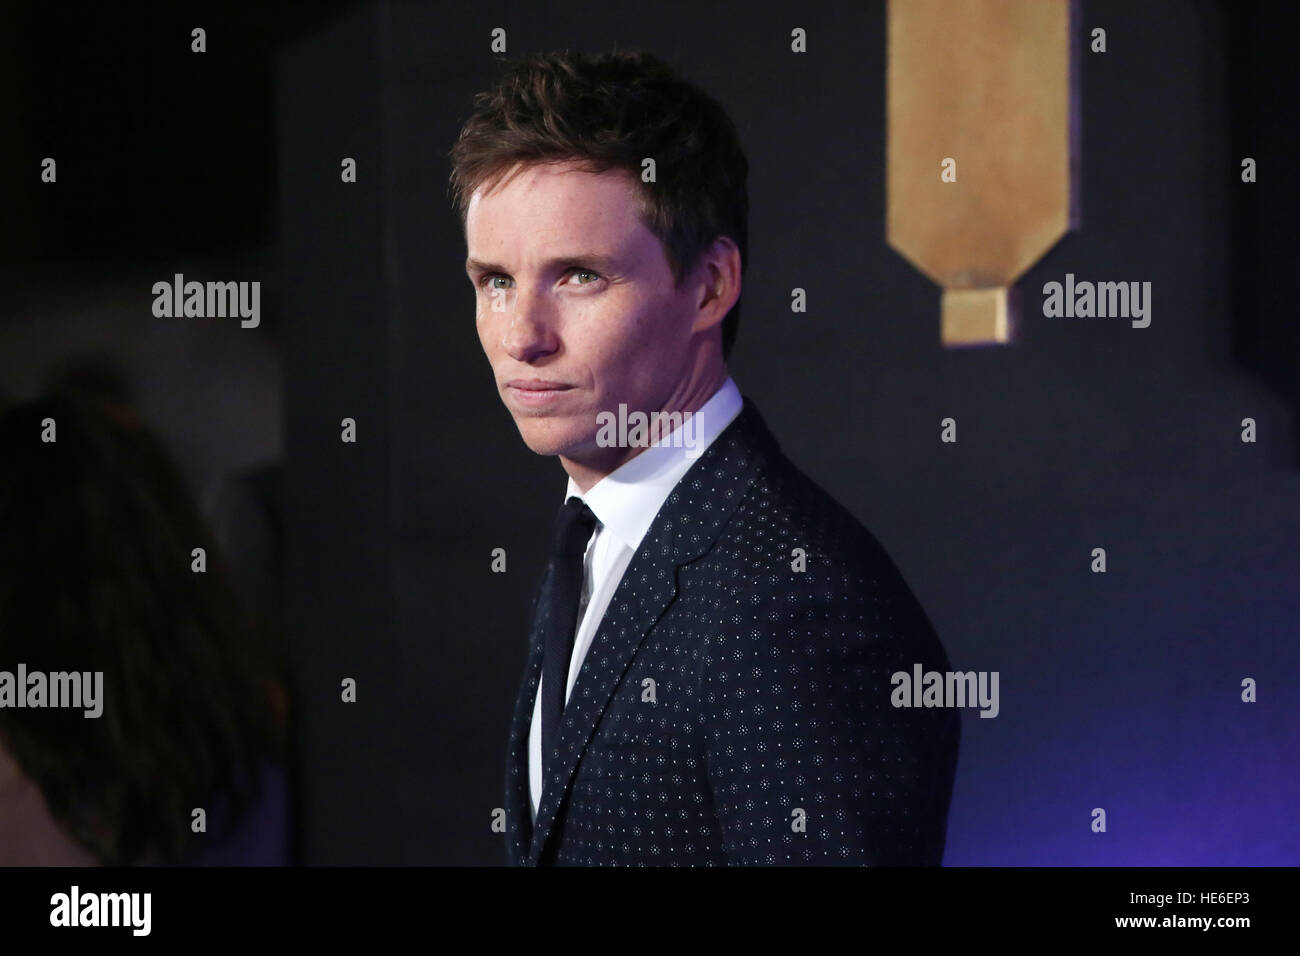 Fantastic Beasts And Where To Find Them UK Premiere - Arrivals  Featuring: Eddie Redmayne Where: London, United Kingdom When: 15 Nov 2016 Stock Photo